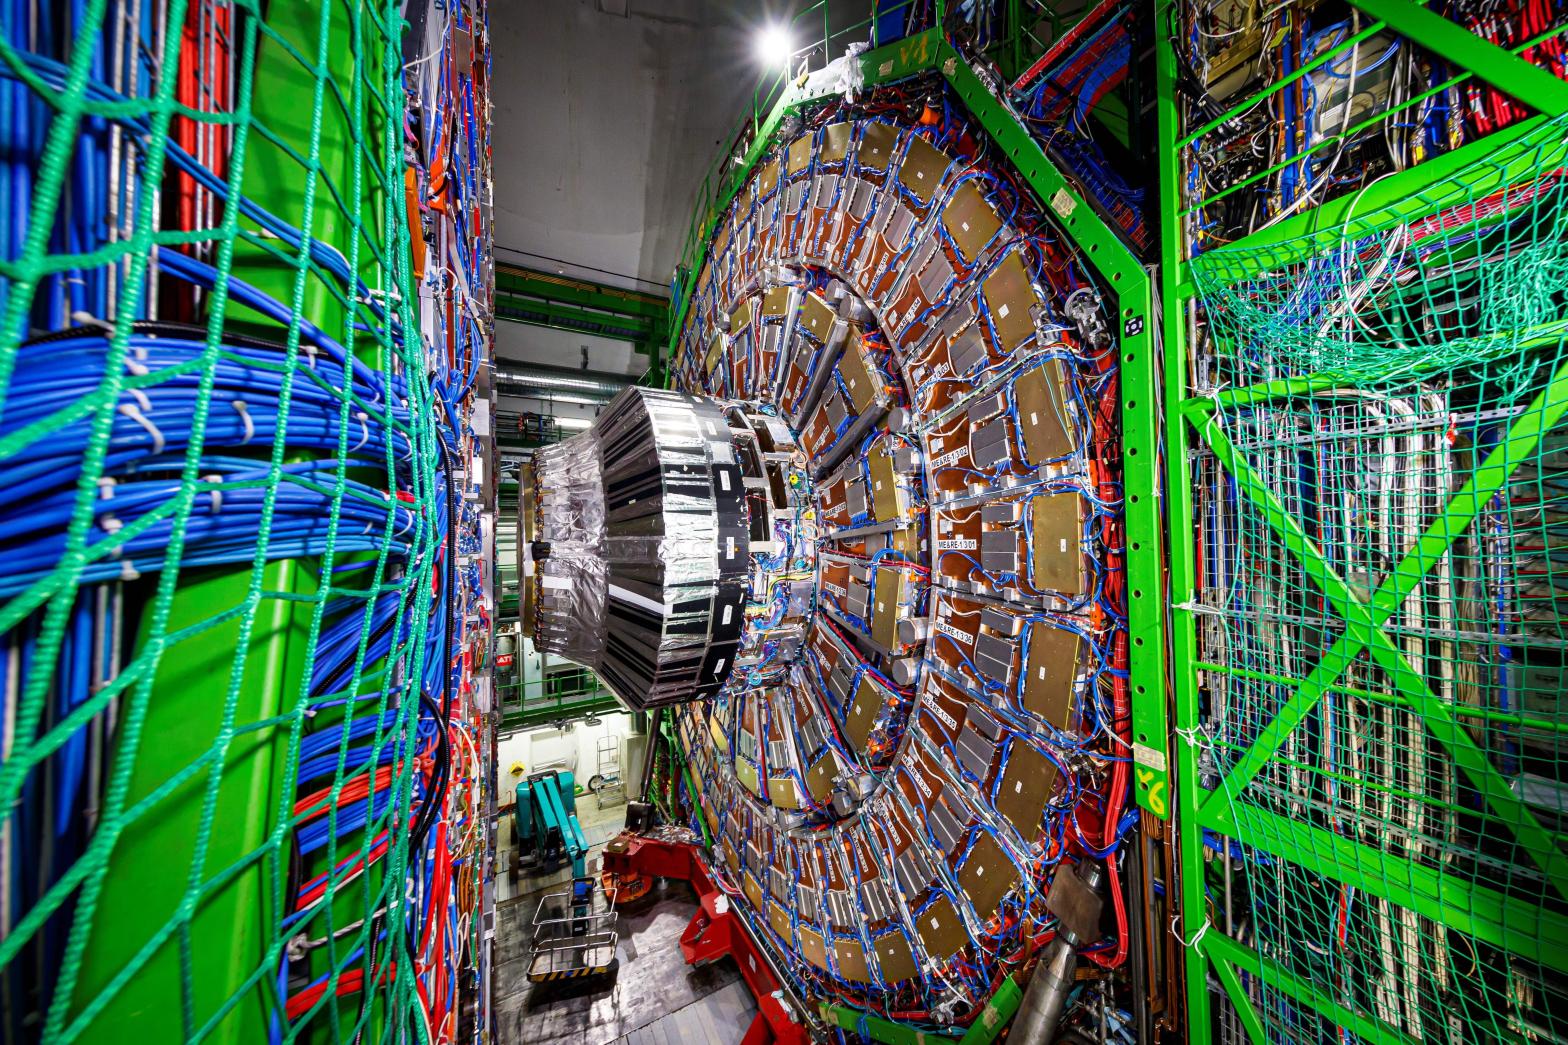 The Compact Muon Solenoid (CMS) detector in a tunnel of the Large Hadron Collider. (Photo: VALENTIN FLAURAUD/AFP, Getty Images)